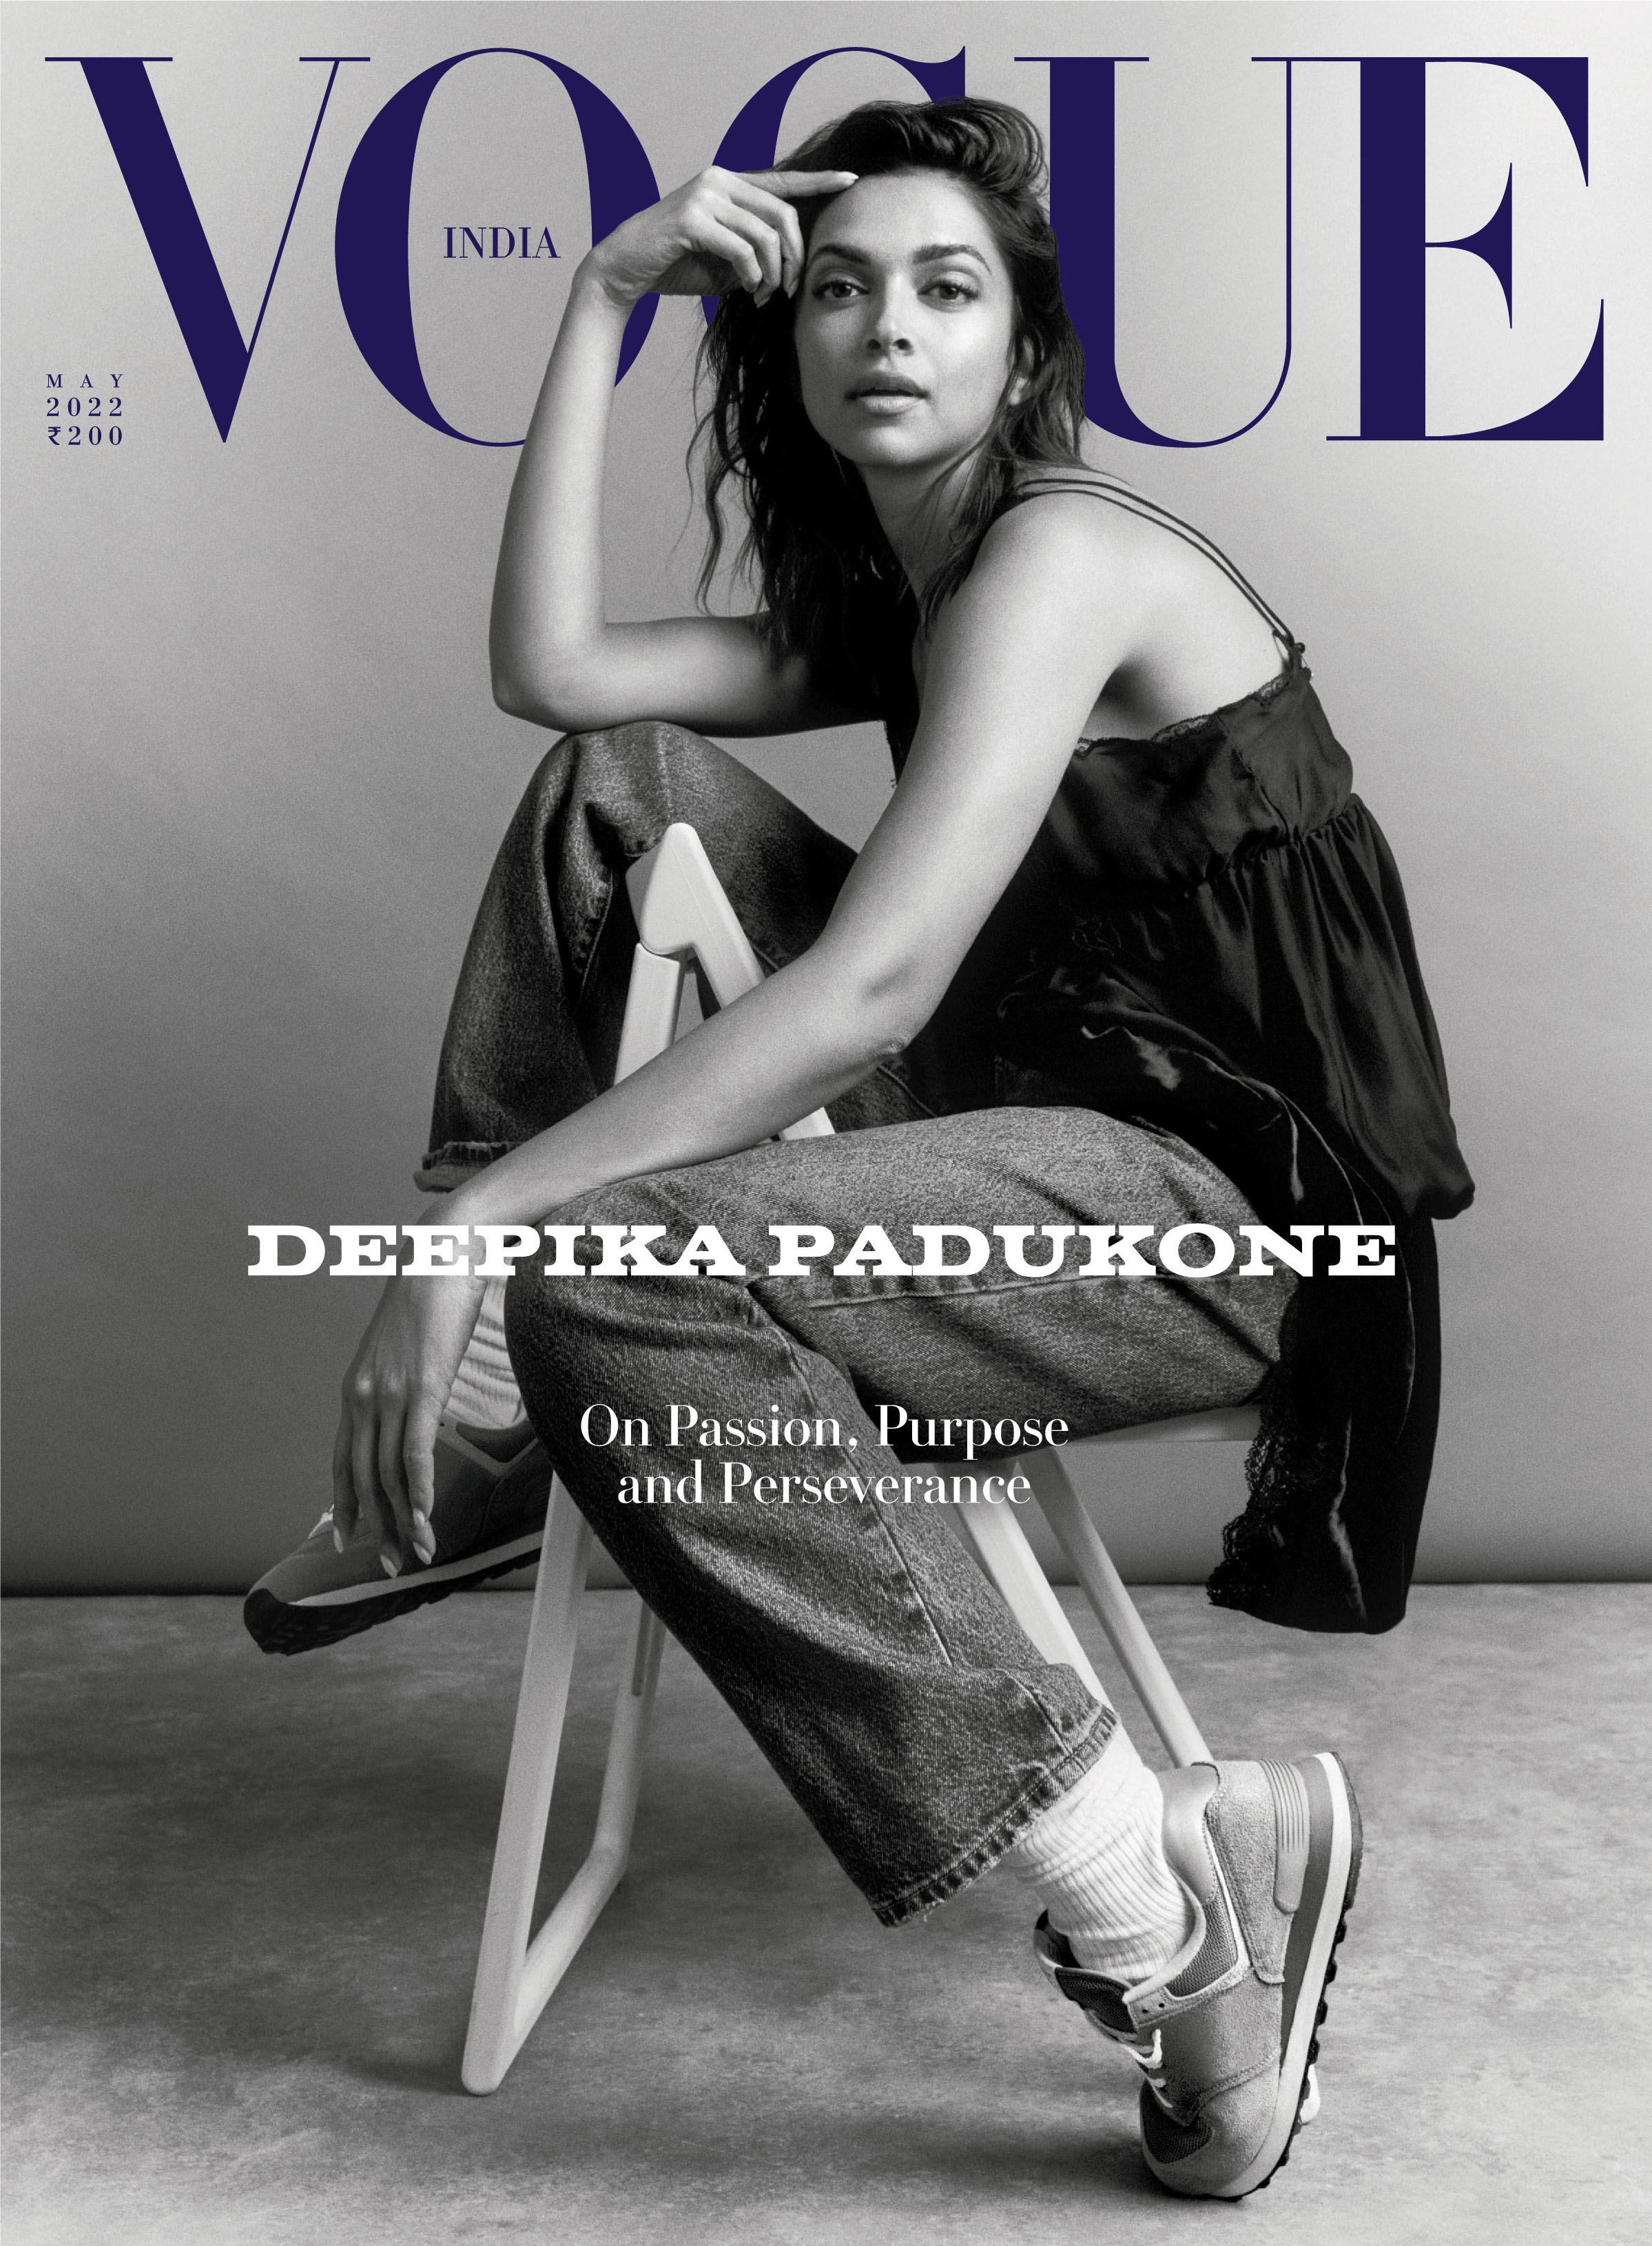 Vogue India's May 2022 Cover featuring Deepika Padukone